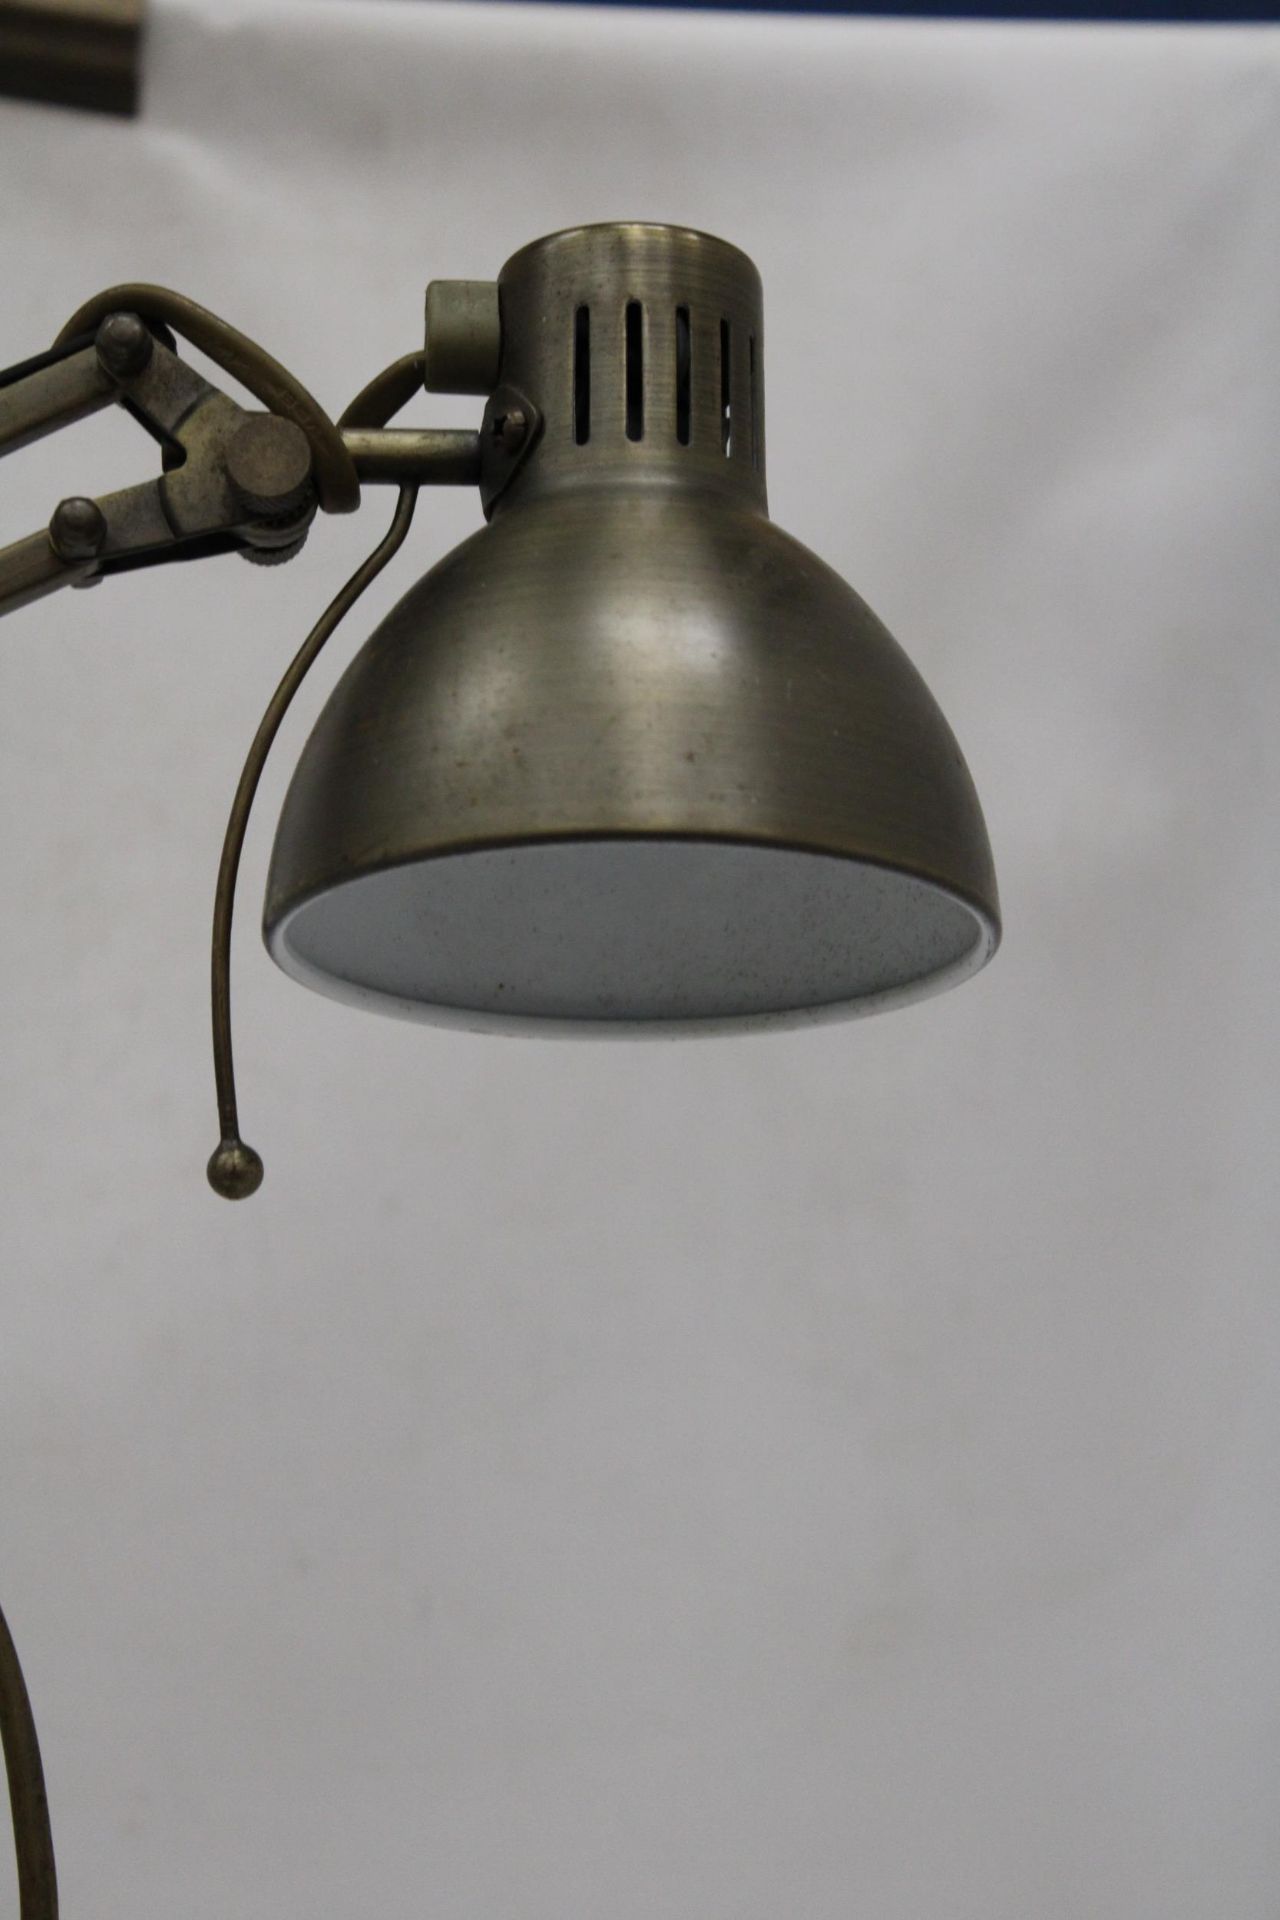 A VINTAGE METAL ANGLEPOISE LAMP - Image 3 of 6